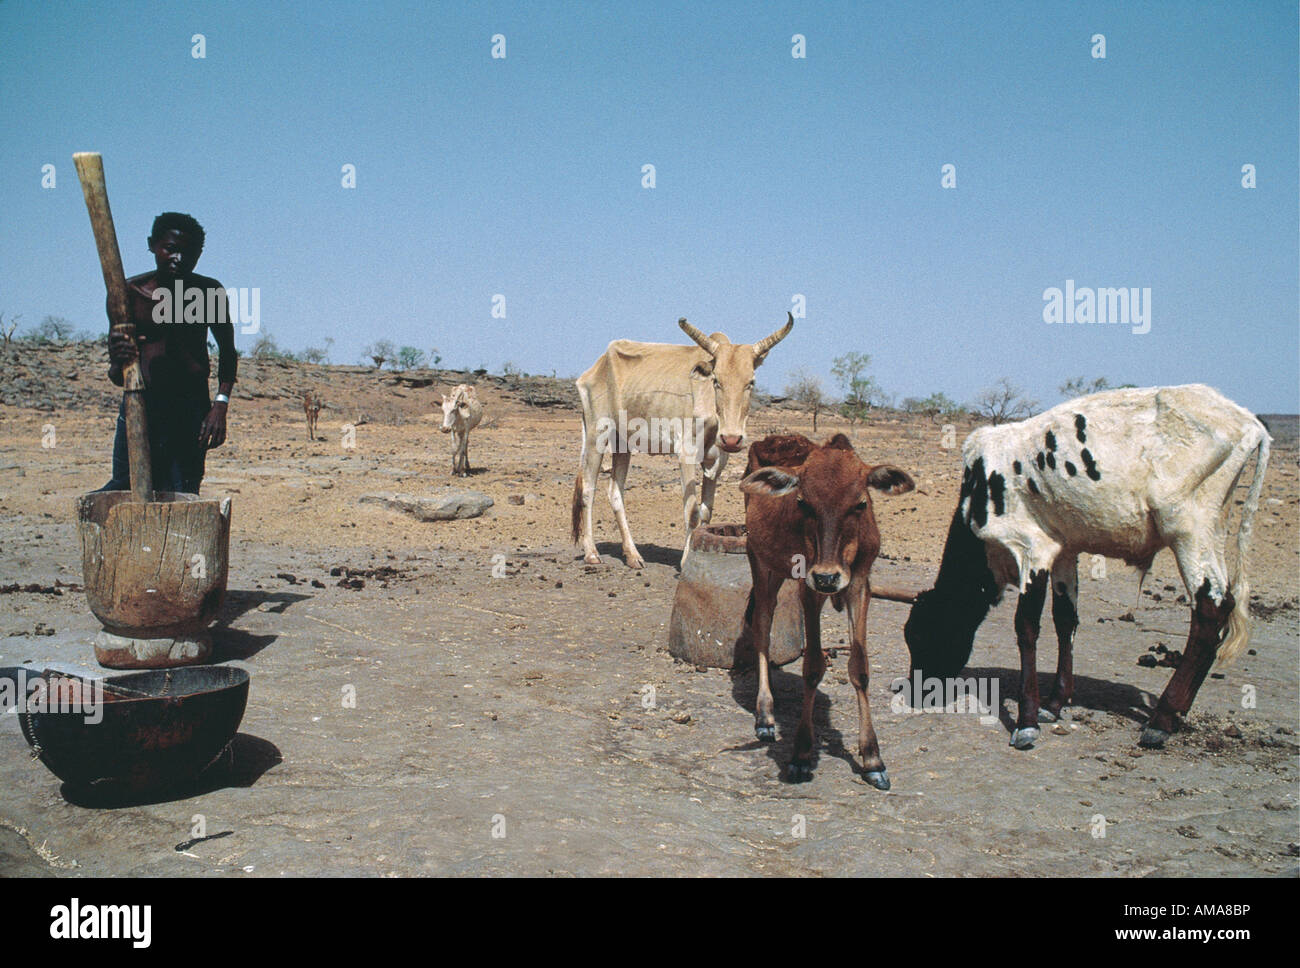 Man pounding grain with a large wooden pestle and mortar Nearby there are four emaciated skinny cows Niger West Africa Stock Photo